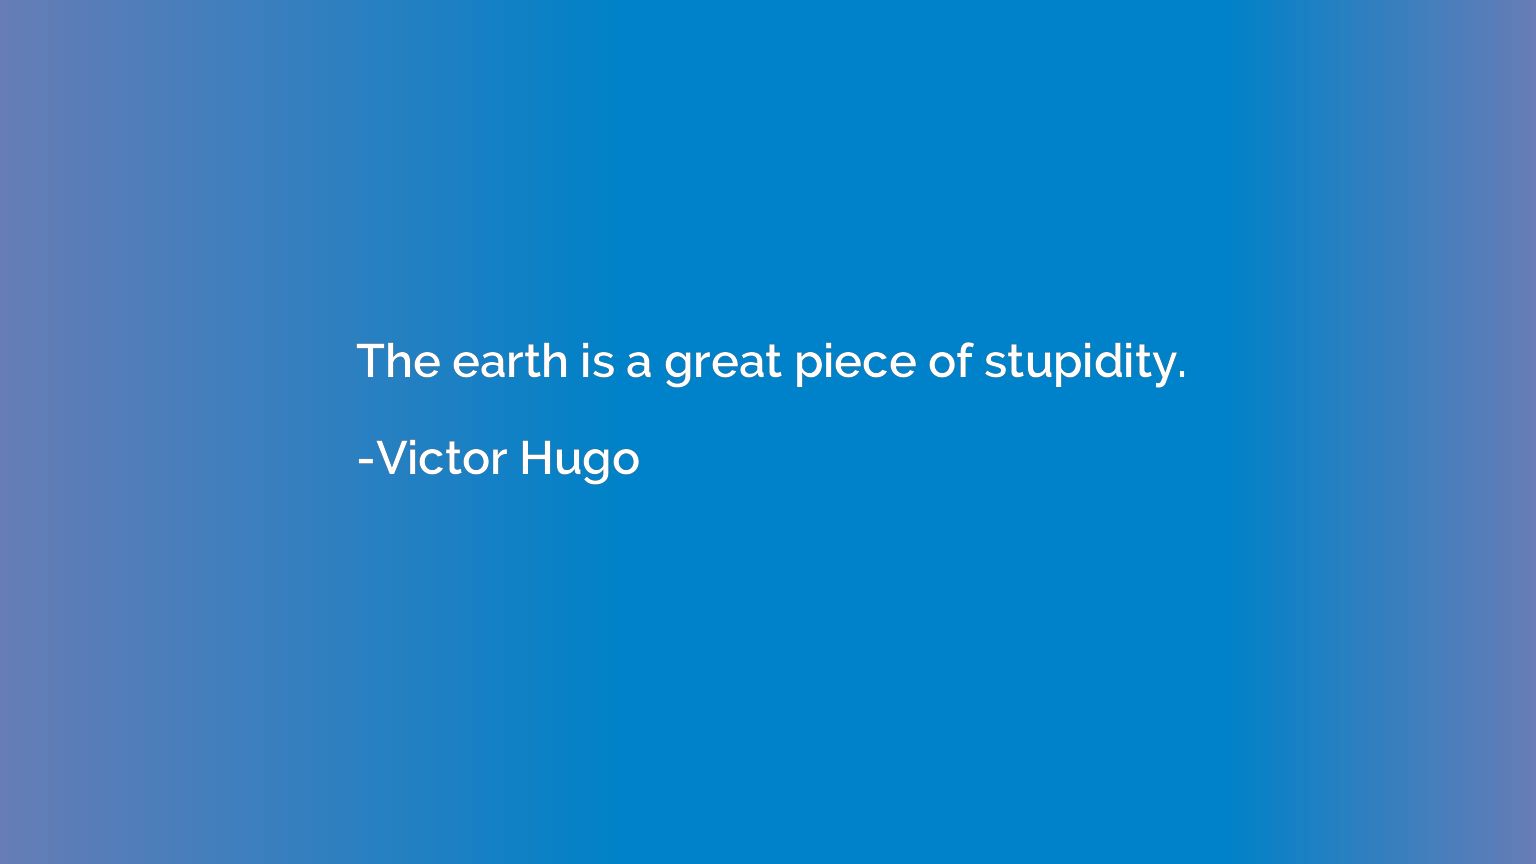 The earth is a great piece of stupidity.